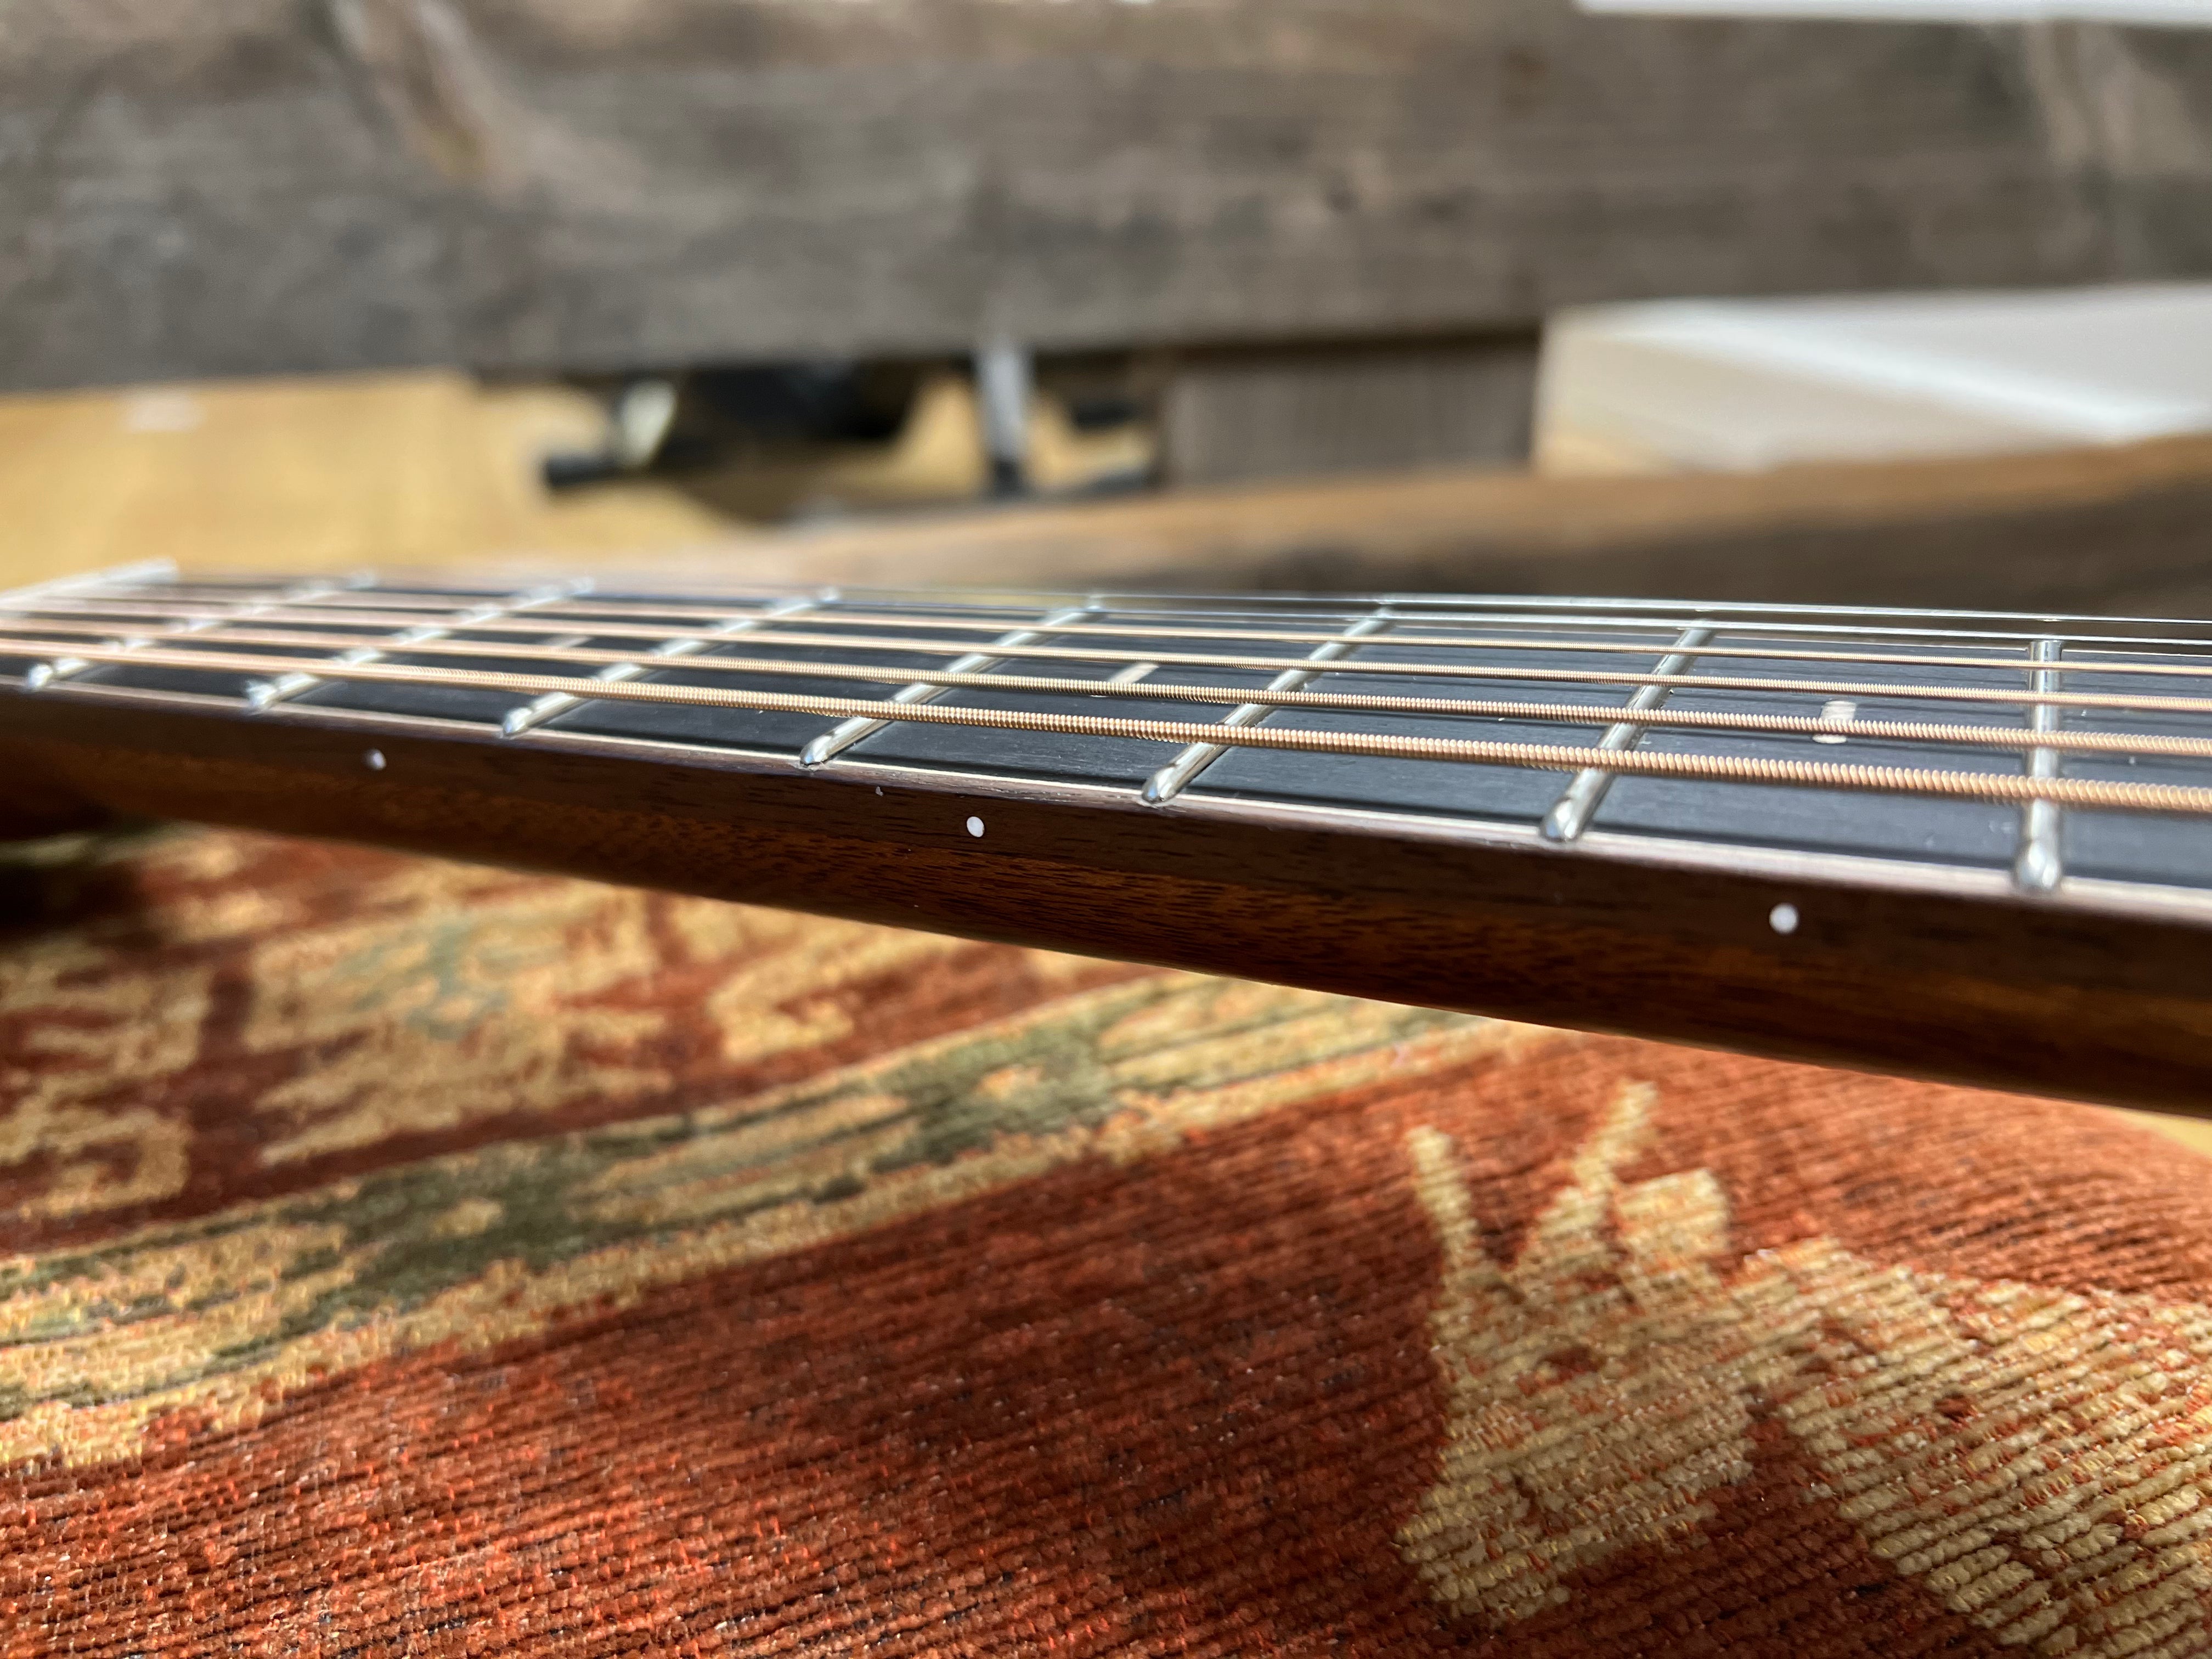 Cort Flow-OC Premium Grade All Solid Wood Electro Acoustic Guitar with LR Baggs Anthem, Electro Acoustic Guitar for sale at Richards Guitars.